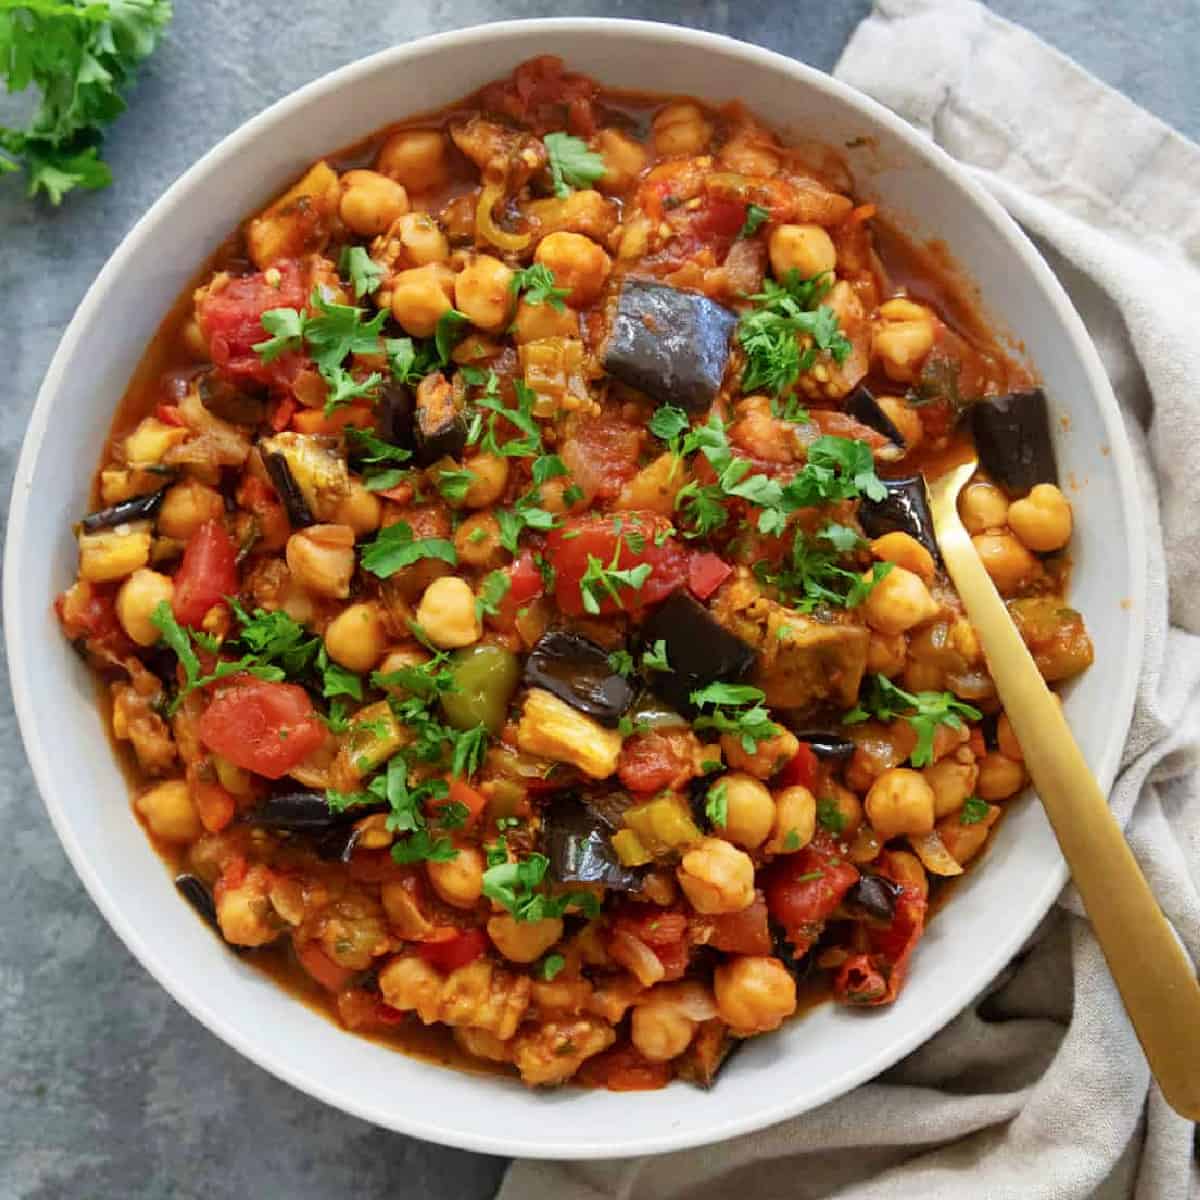 This recipe for eggplant chickpea stew is surprisingly easy and stress-free. It's vegan, gluten-free and dairy-free - perfect for picky eaters!
